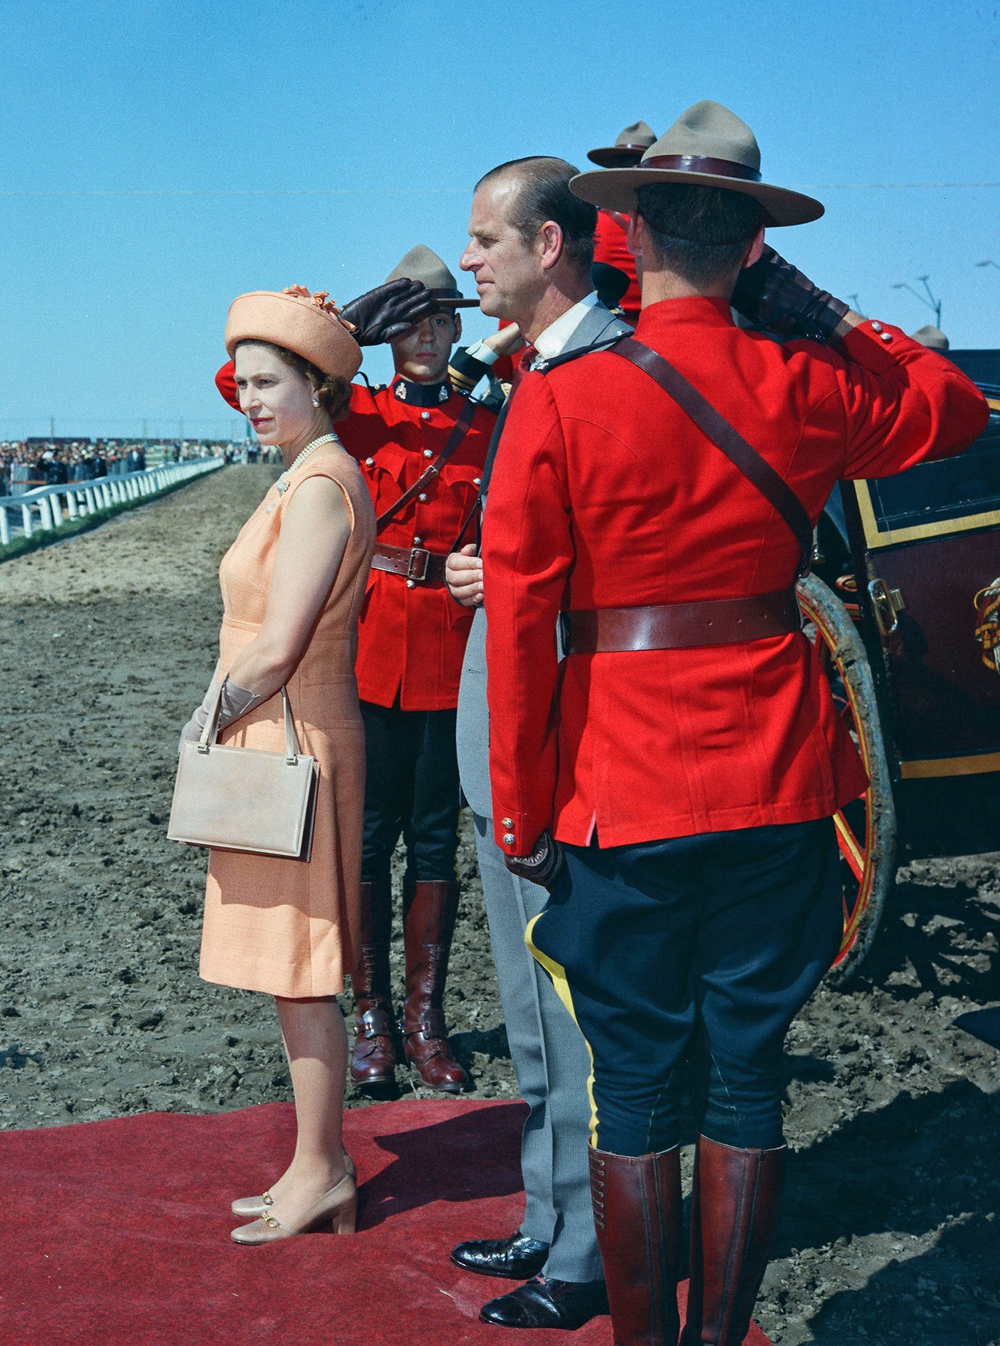 Her Majesty Queen Elizabeth II at Assiniboia Downs for the 1970 Manitoba Derby.